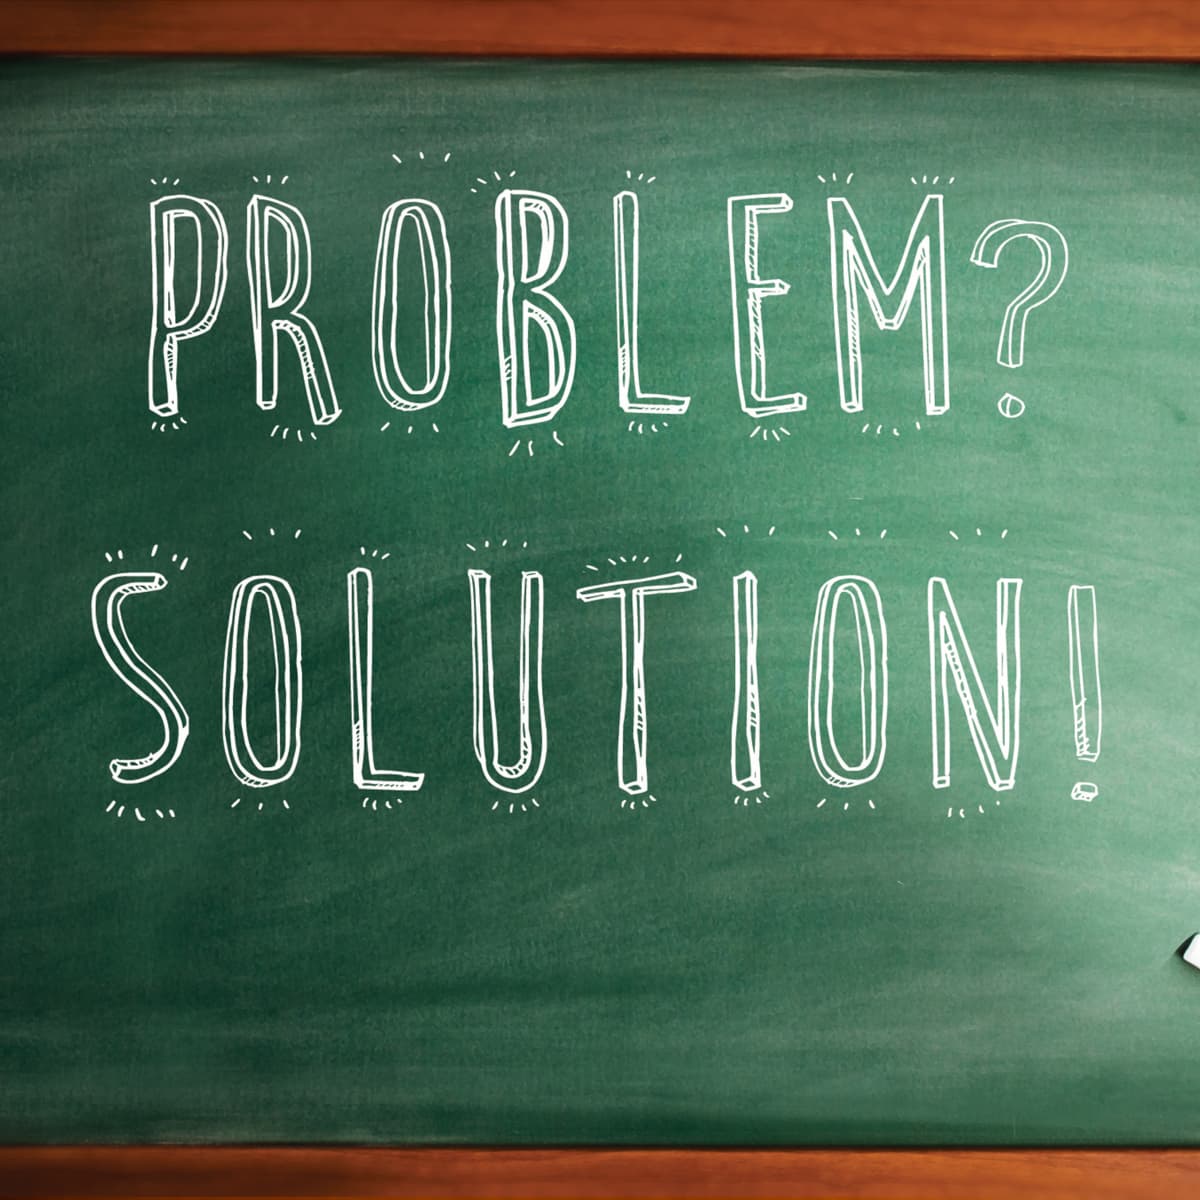 How to Write a Problem Solution Essay: Step-by-Step Instructions